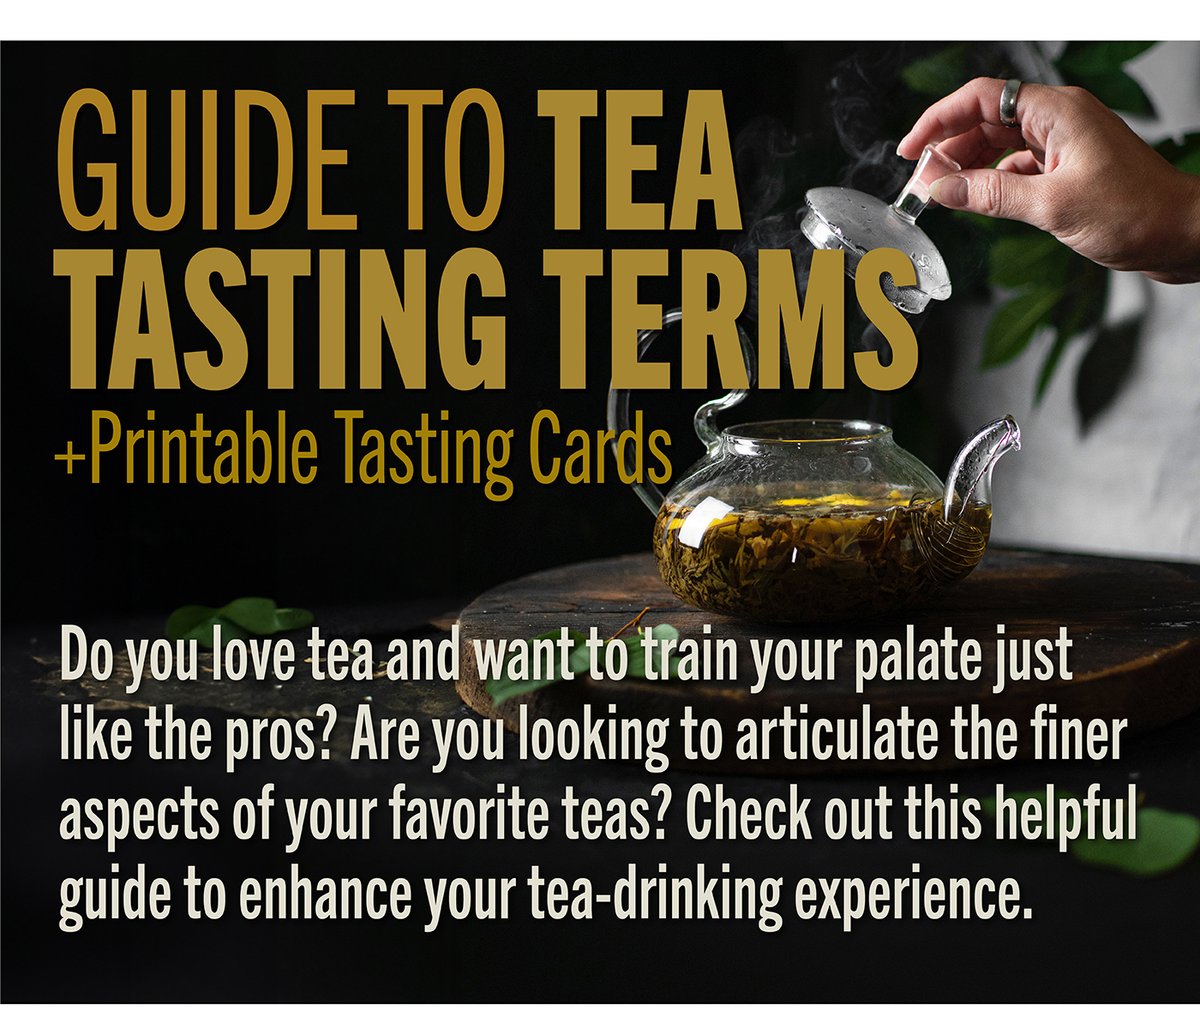 Guide to Tea Tasting Terms